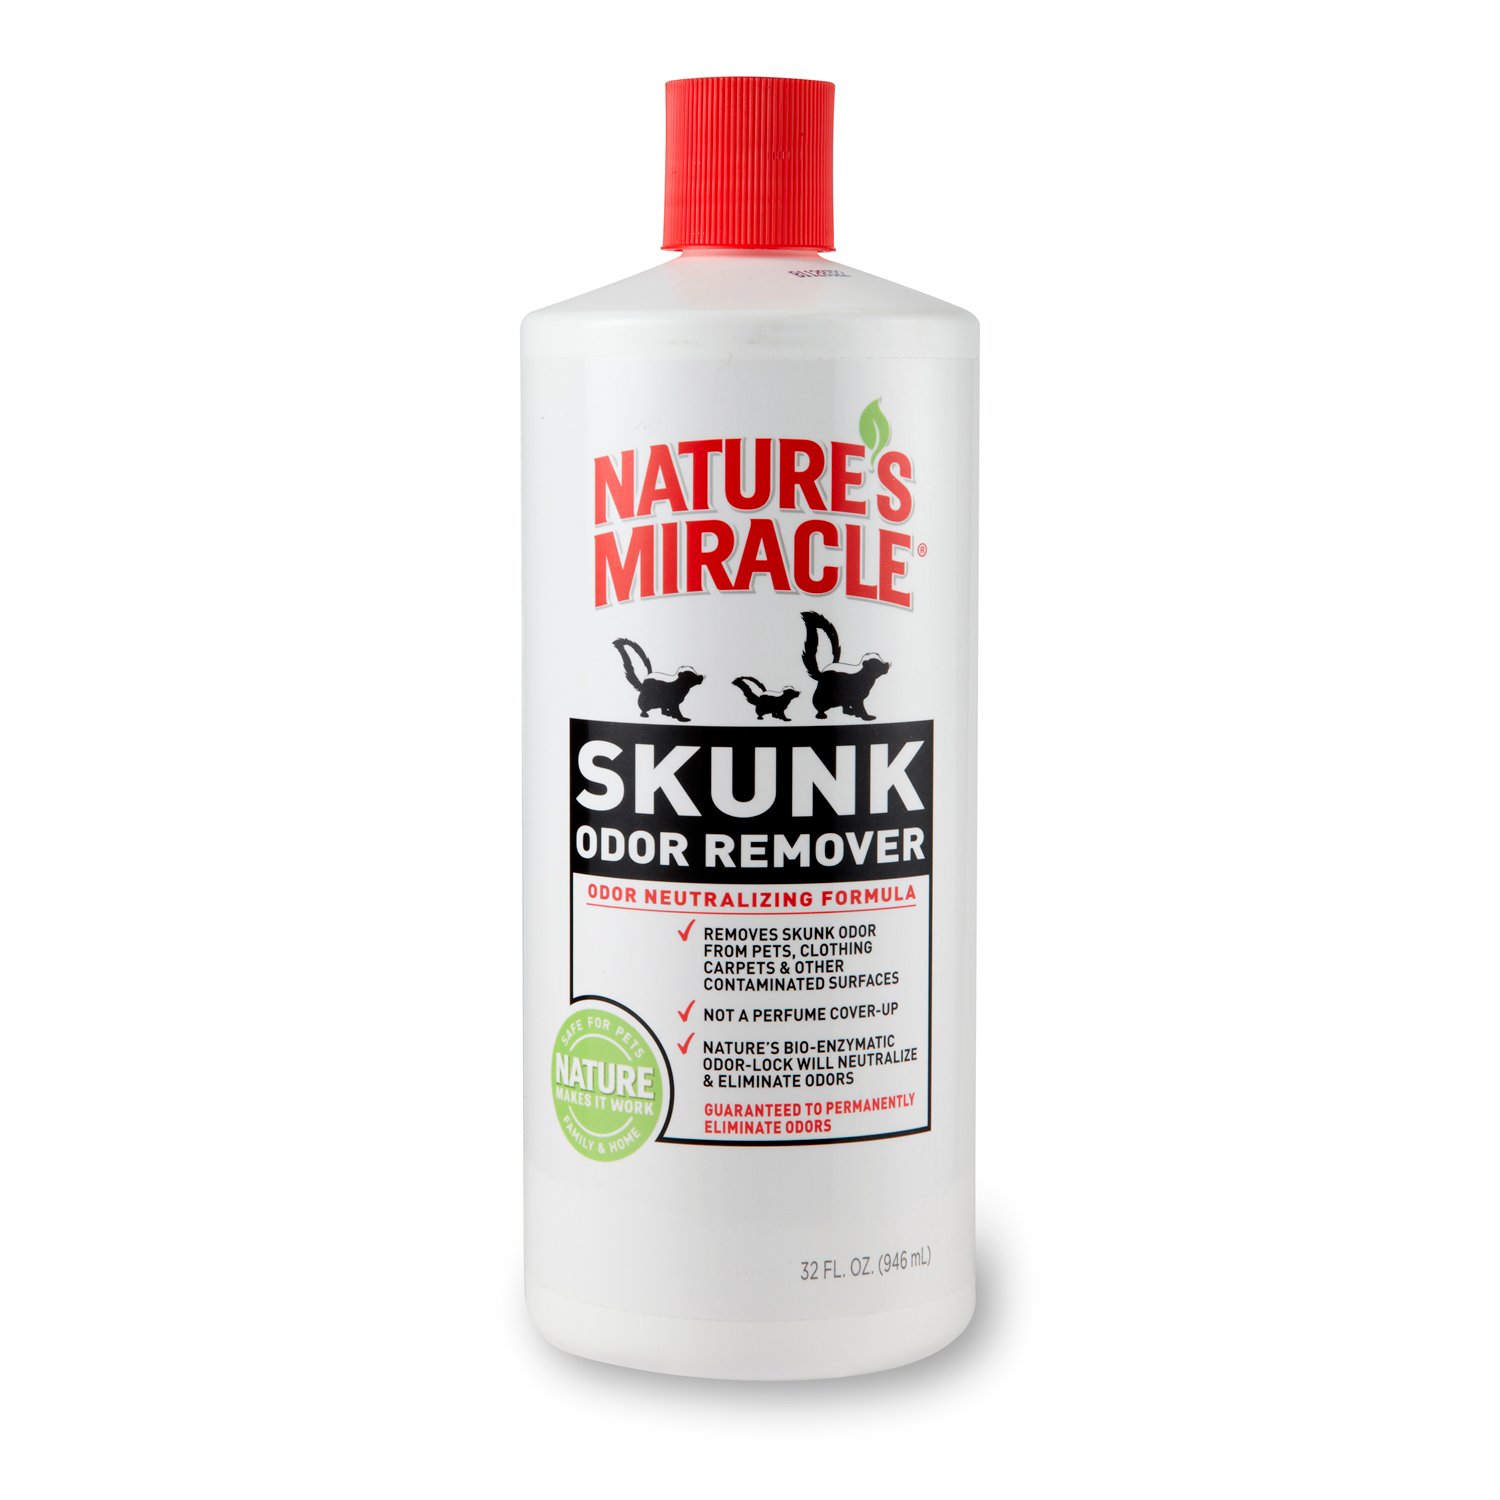 skunk odor miracle remover nature petco smell spray dog natures pet eliminator scent remove